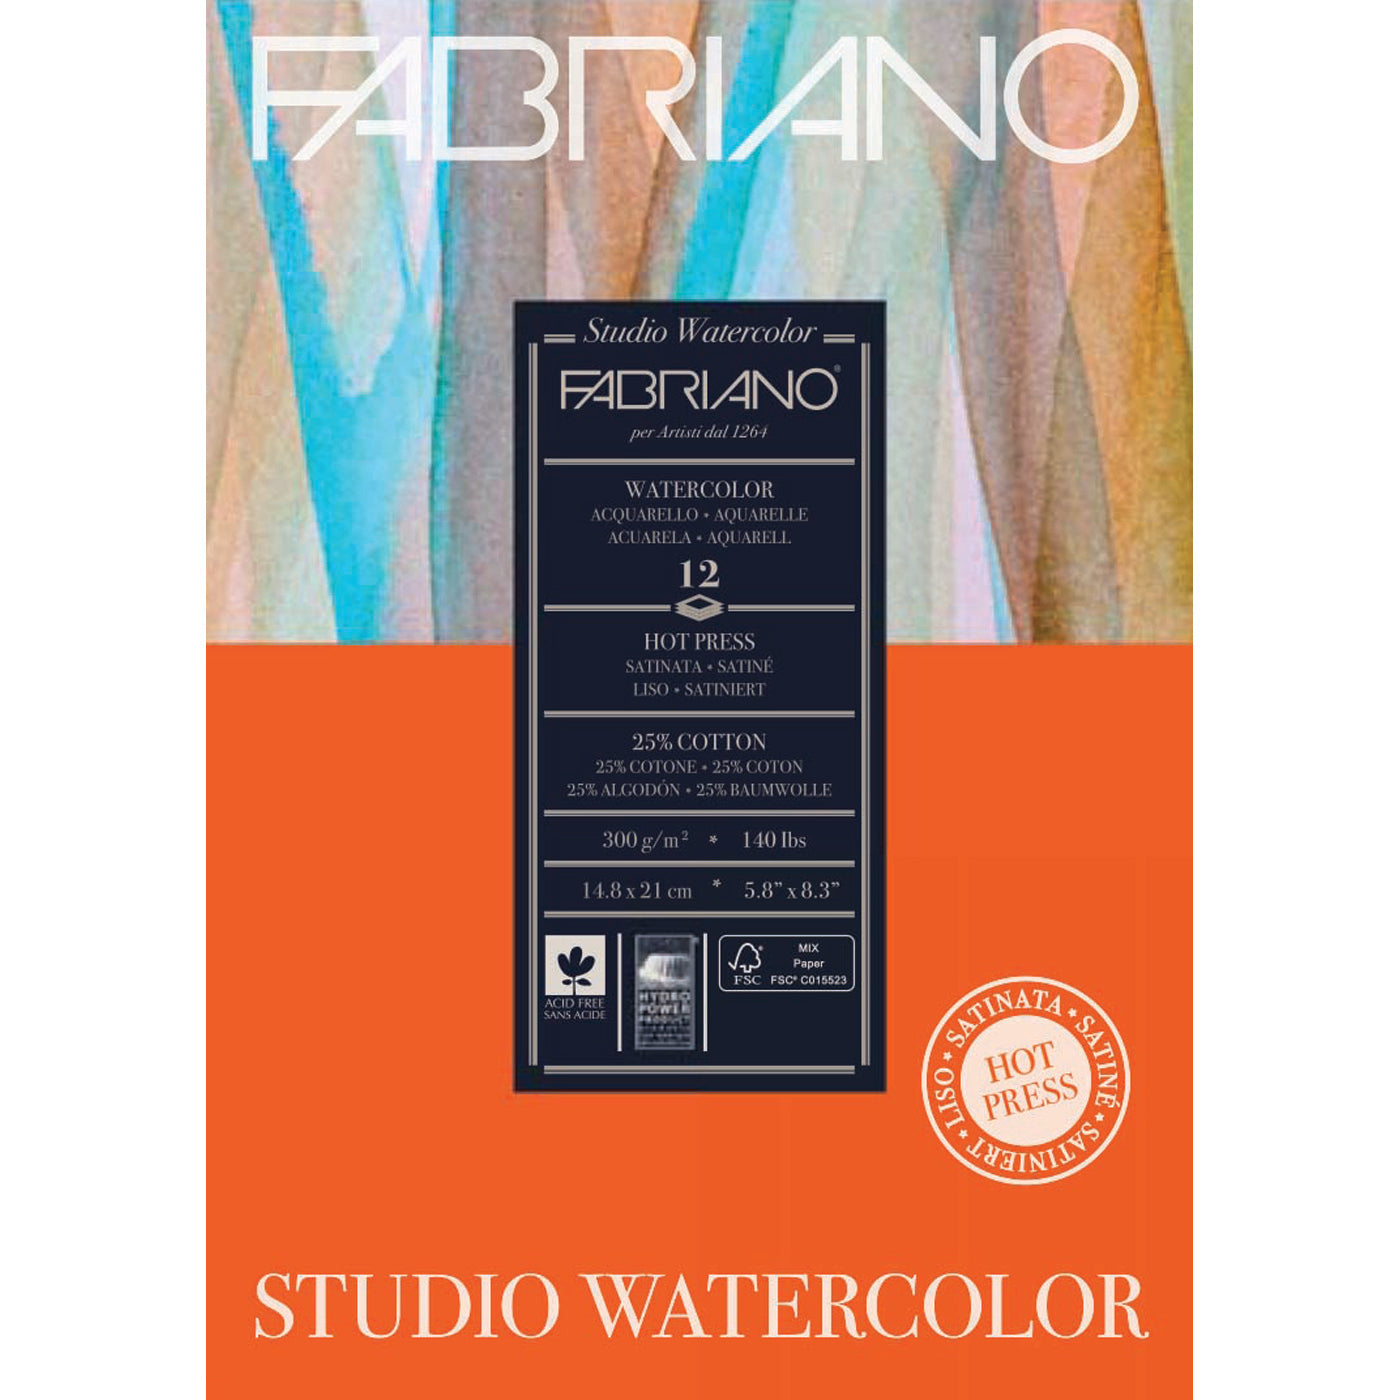 FABRIANO STUDIO WATERCOLOUR HOT PRESSED PAPER PAD 300GSM 12 SHEETS